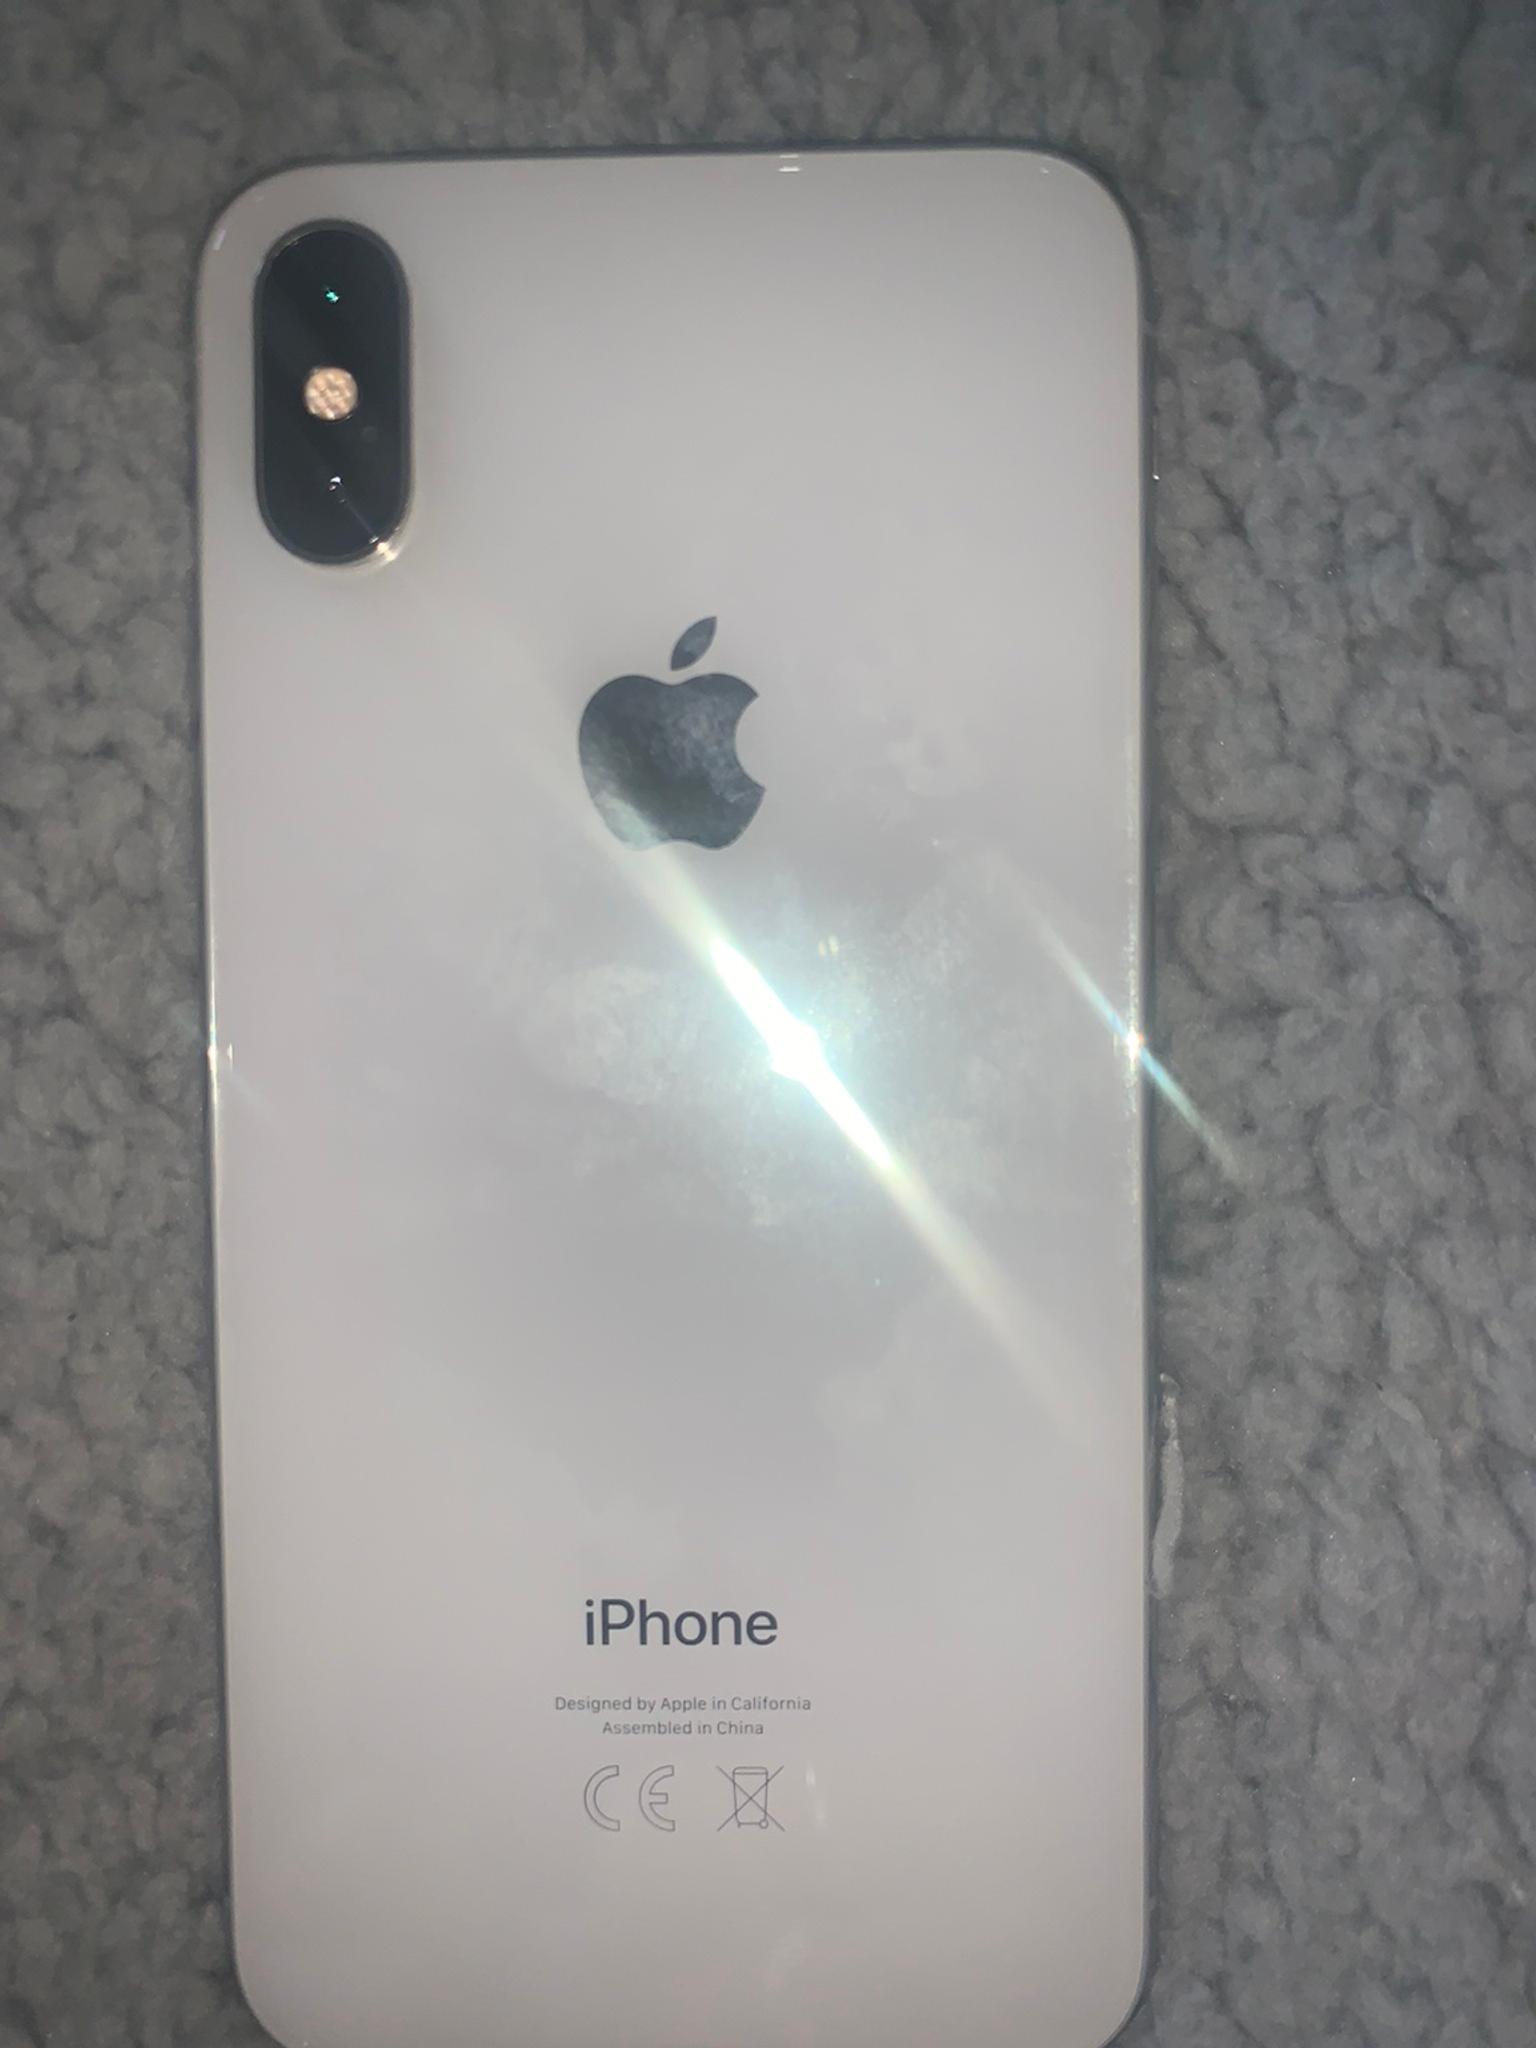 iPhone XS 64 gb white in M26 Bury for £360.00 for sale | Shpock